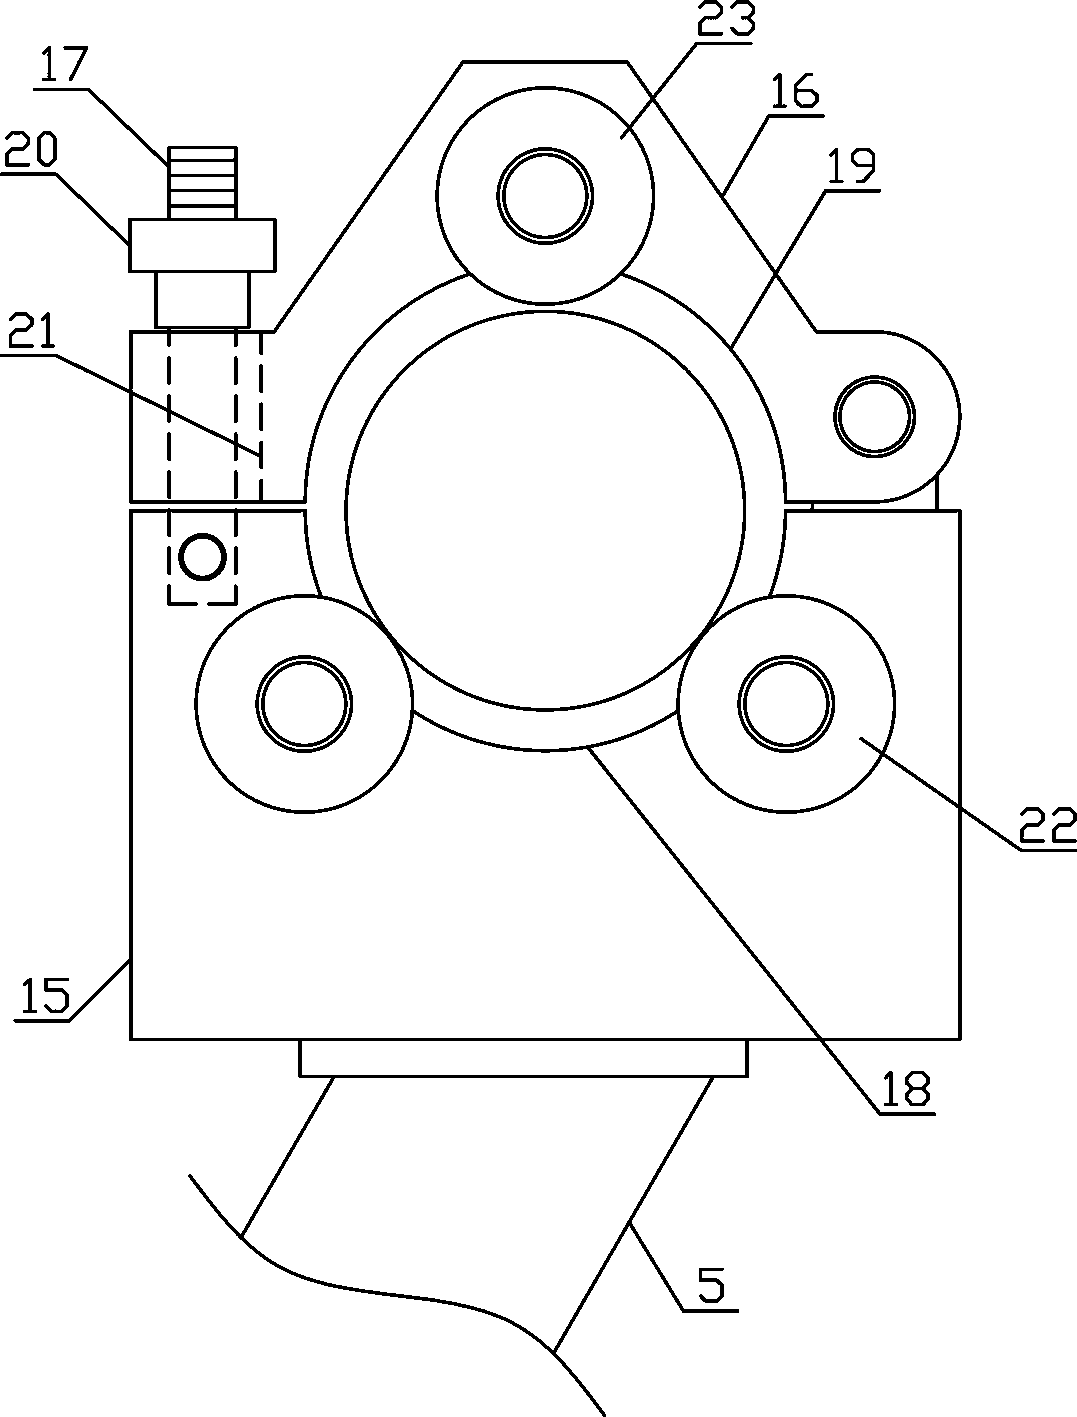 Wool top reciprocated continuous rolling mechanism